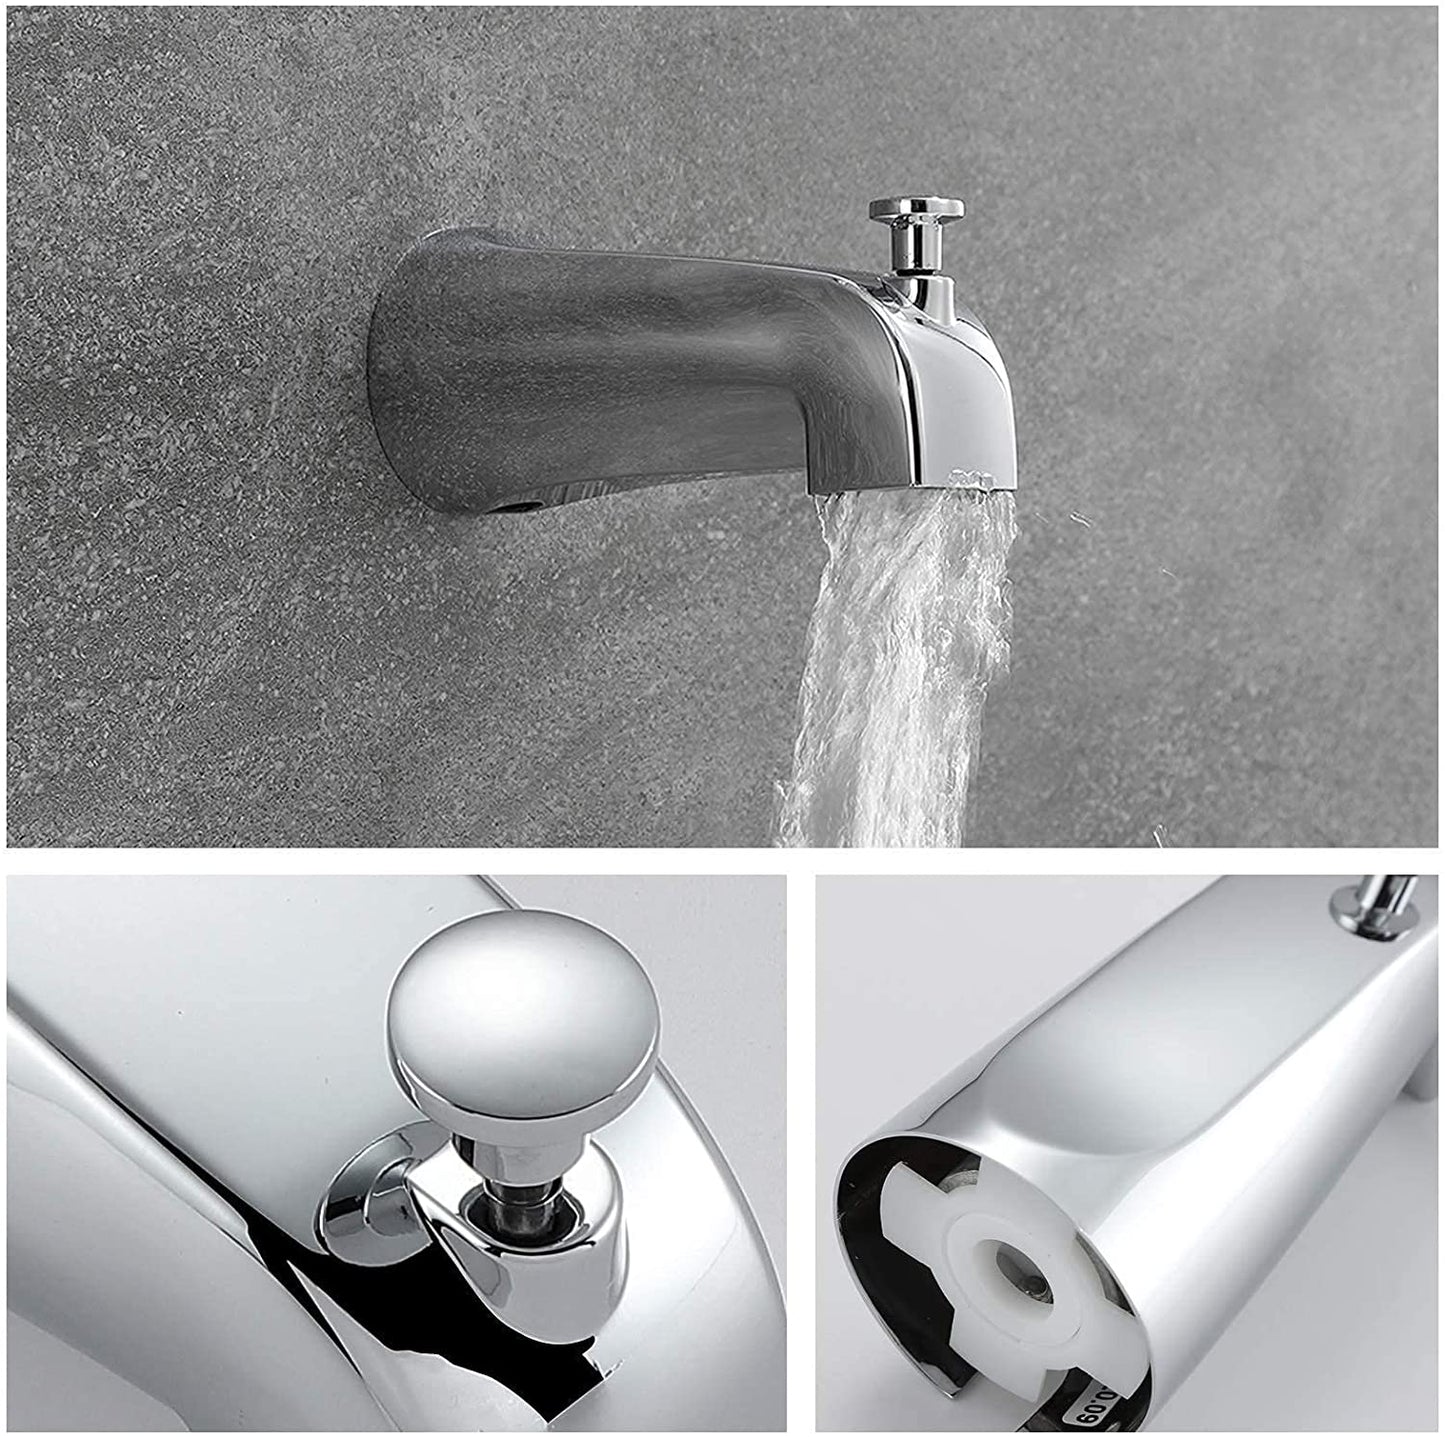 Chrome 4 Inch Shower Faucet wih Tub Spout Combo (Valve Included) ｜ALWEN